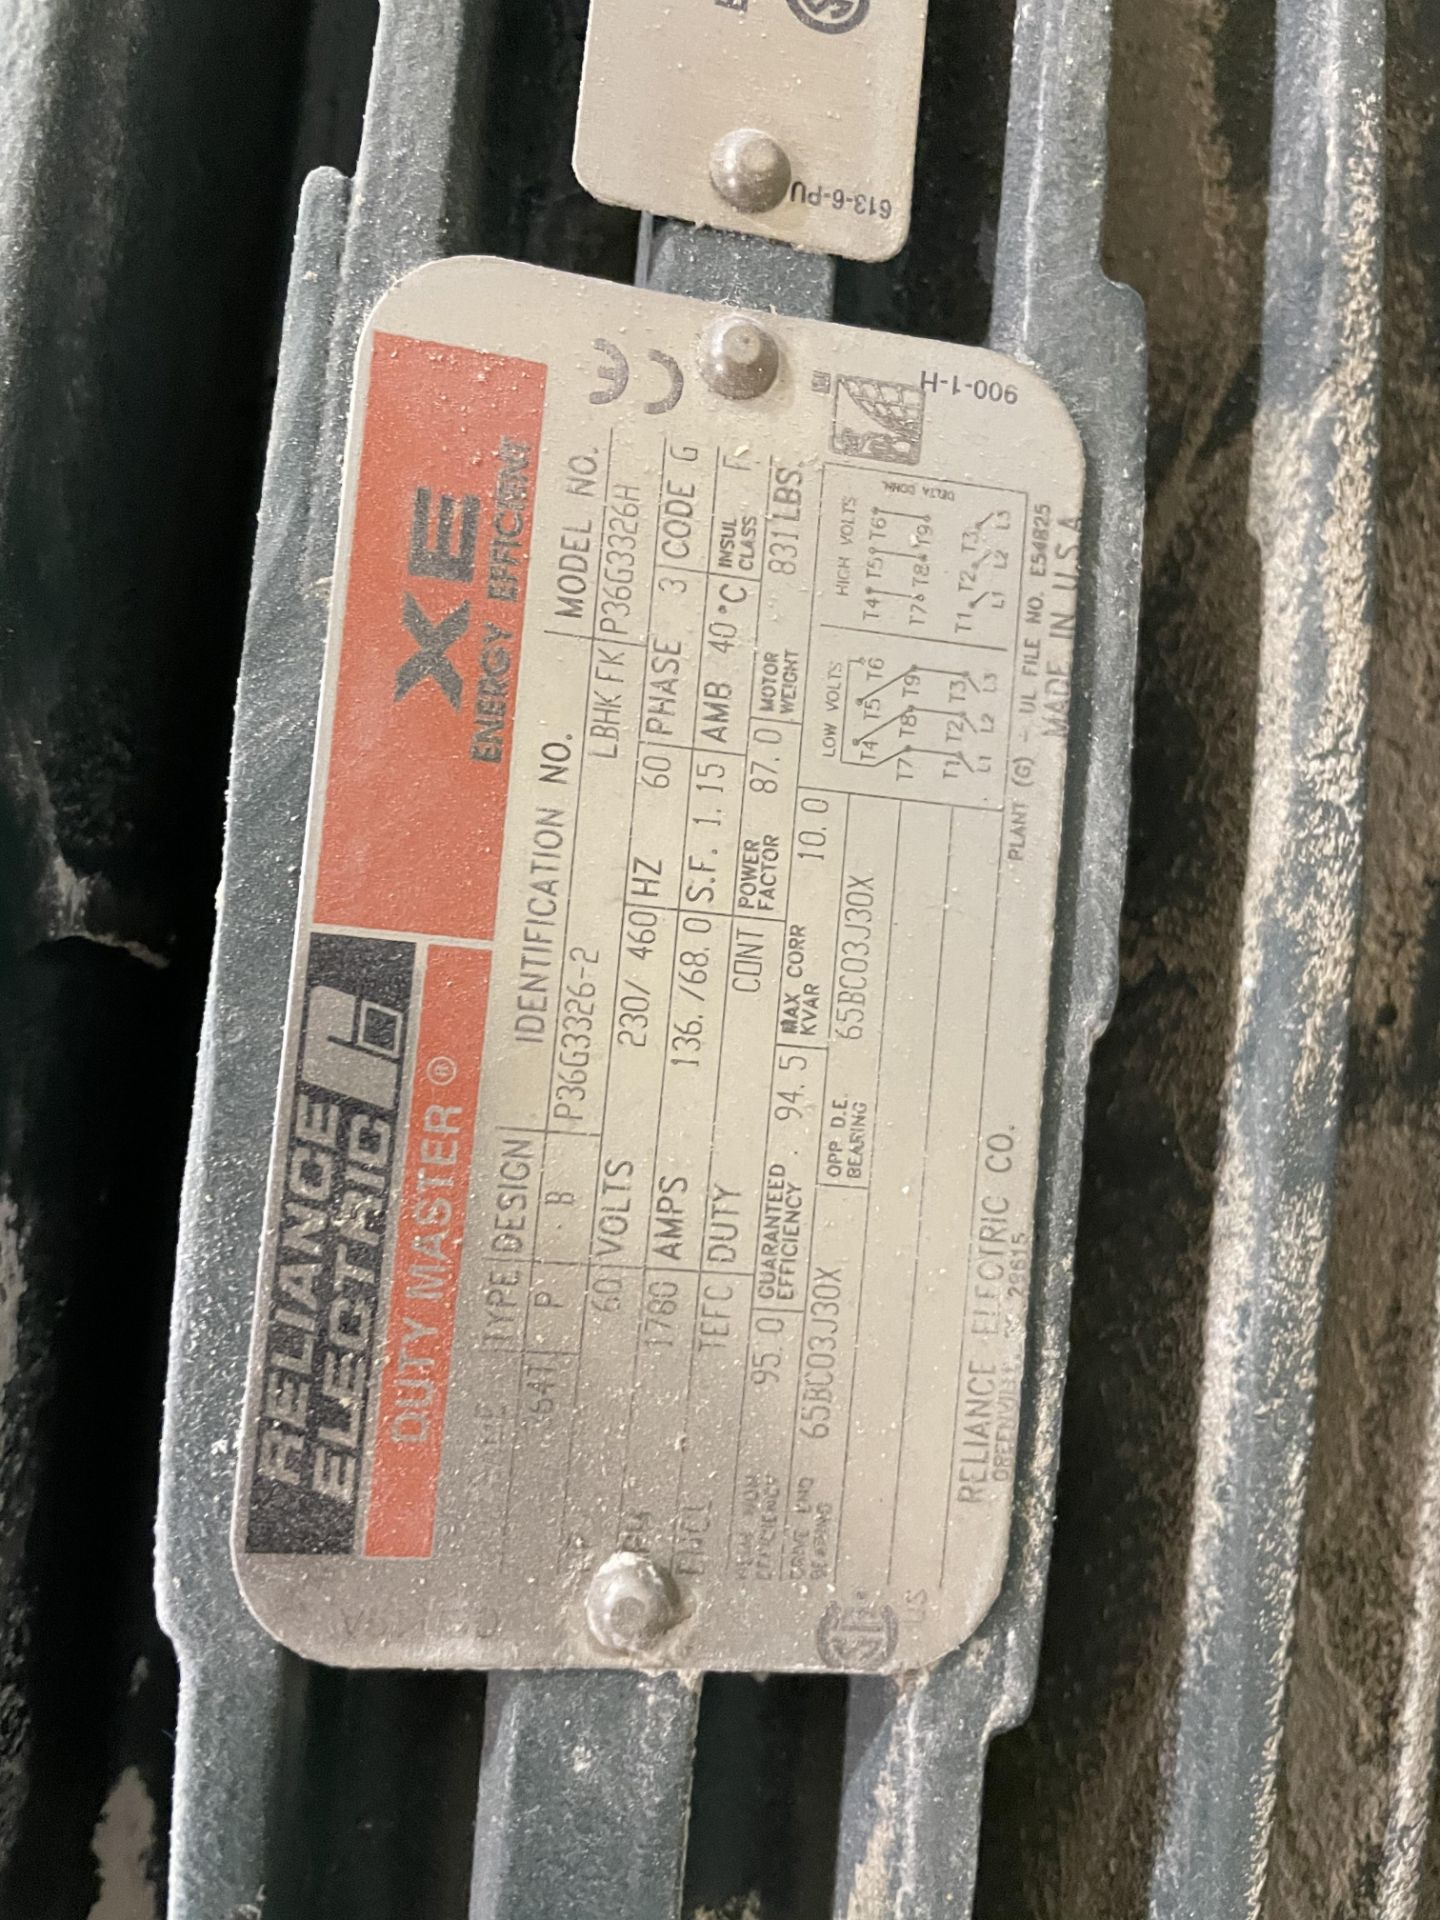 Reliance Electric 60 HP Motor Loading/Rigging Fee $35 - Image 3 of 3